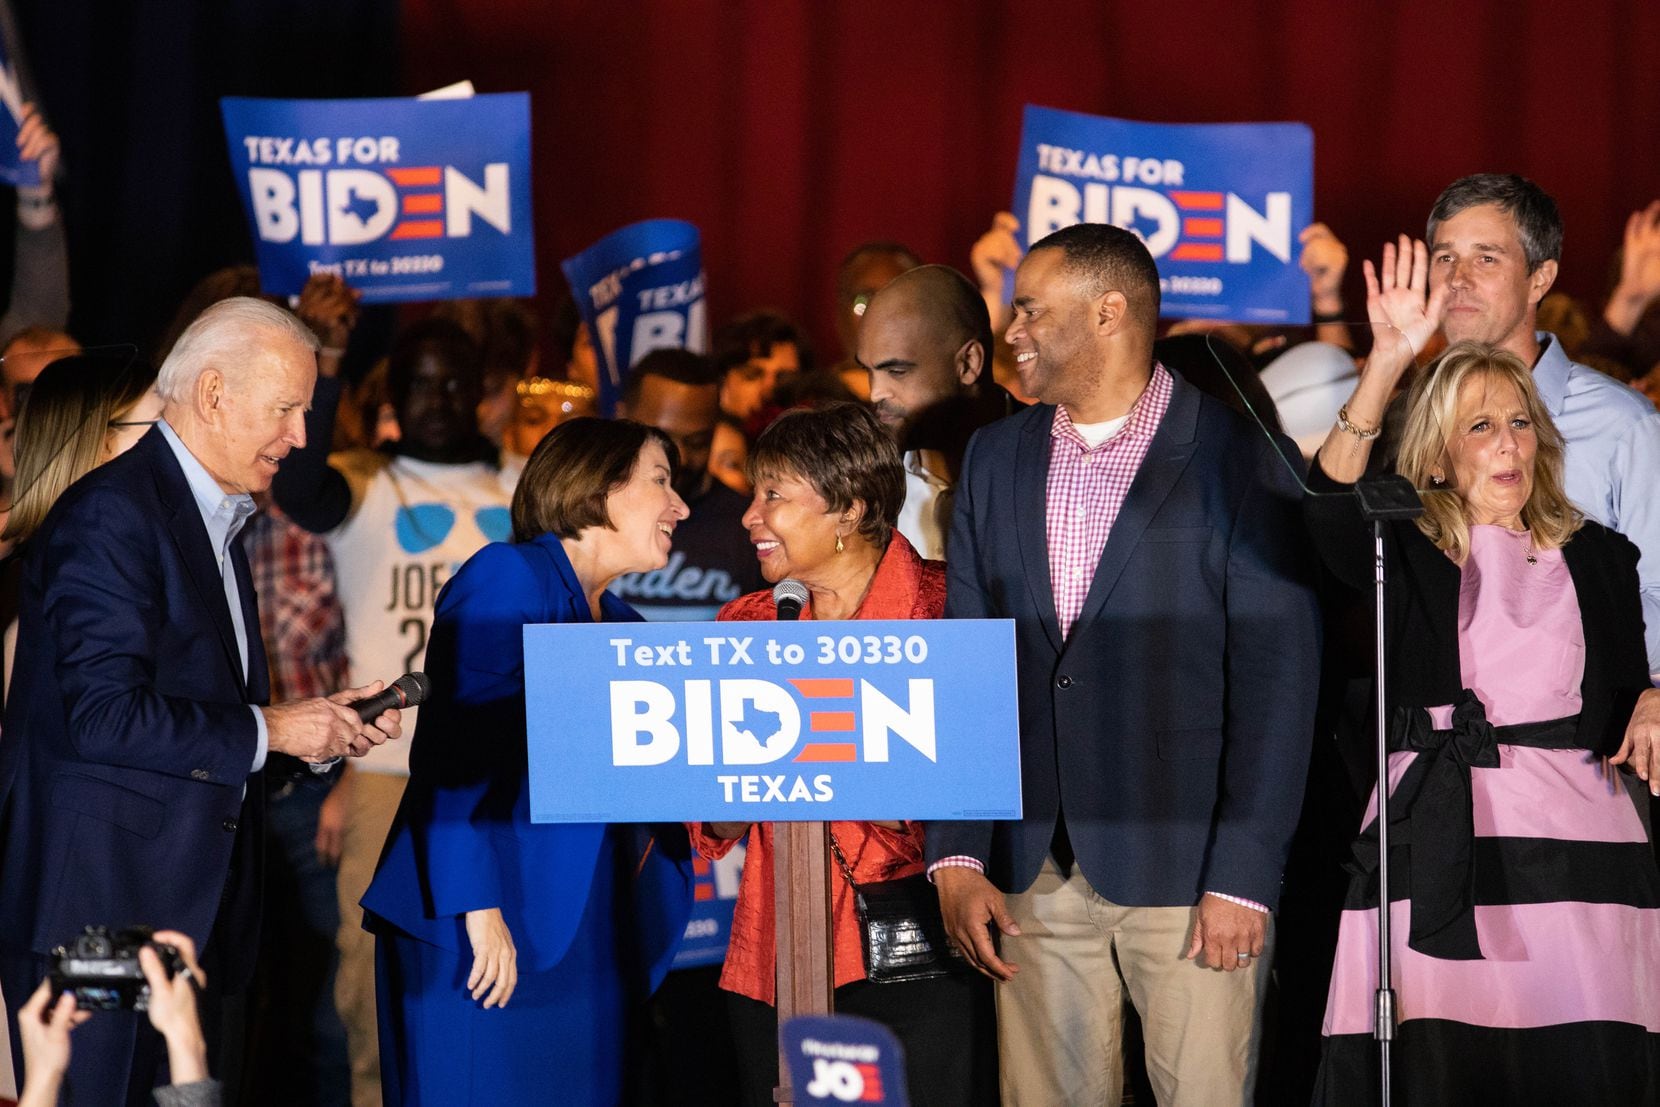 Democratic presidential primary candidate Joe Biden (far left) was endorsed by (from left) Sen. Amy Klobuchar (D-MN), Rep. Eddie Bernice Johnson (D-Dallas), Rep. Colin Allred (D-Dallas), Rep. Mark Veasey (D-Fort Worth) and former Rep. Beto O'Rourke of El Paso during a rally at Gilley's in Dallas on Tuesday. Biden's wife, Jill, is at far right.